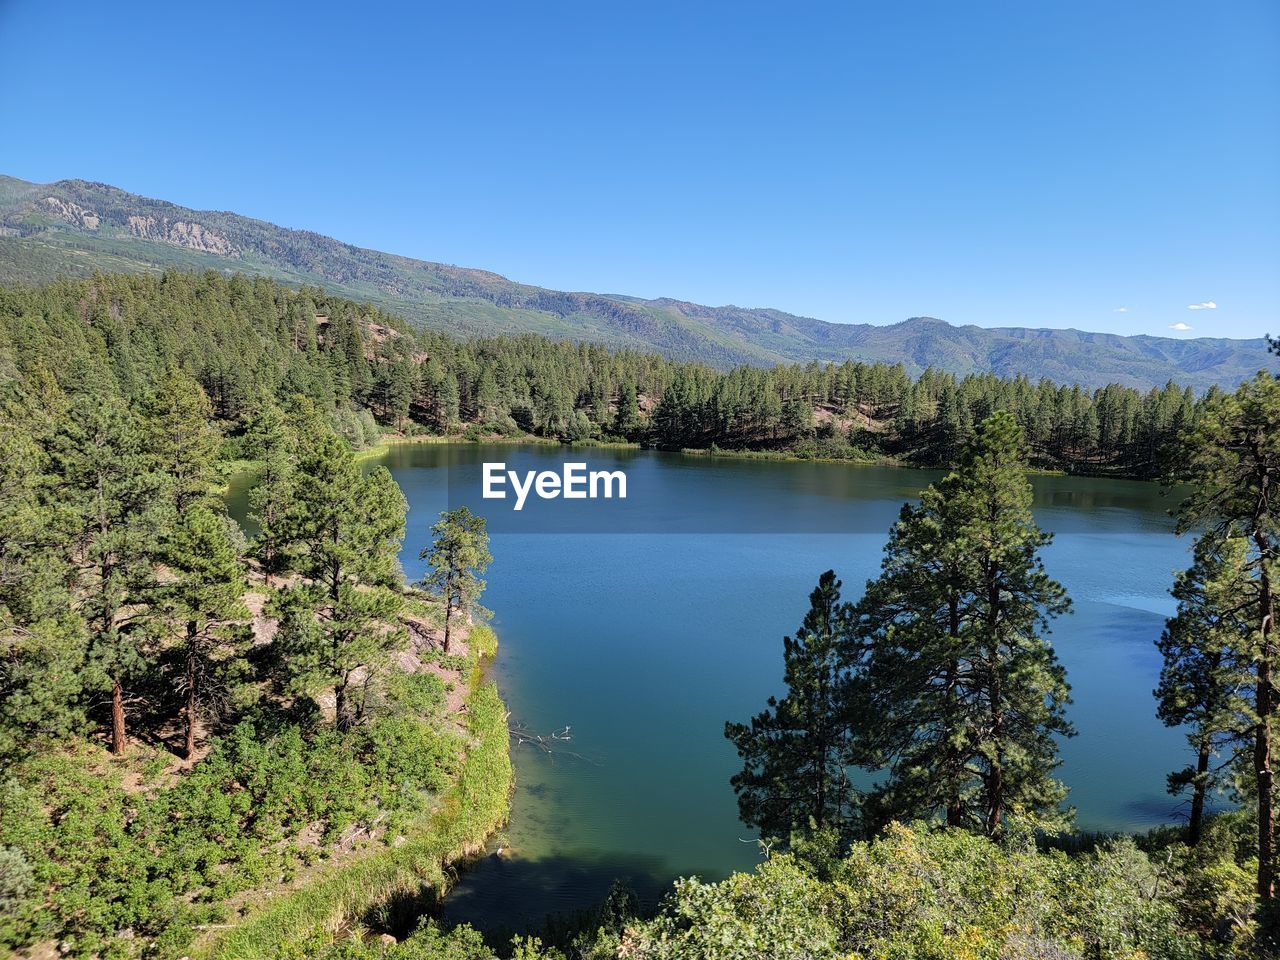 SCENIC VIEW OF LAKE AND TREES AGAINST CLEAR BLUE SKY